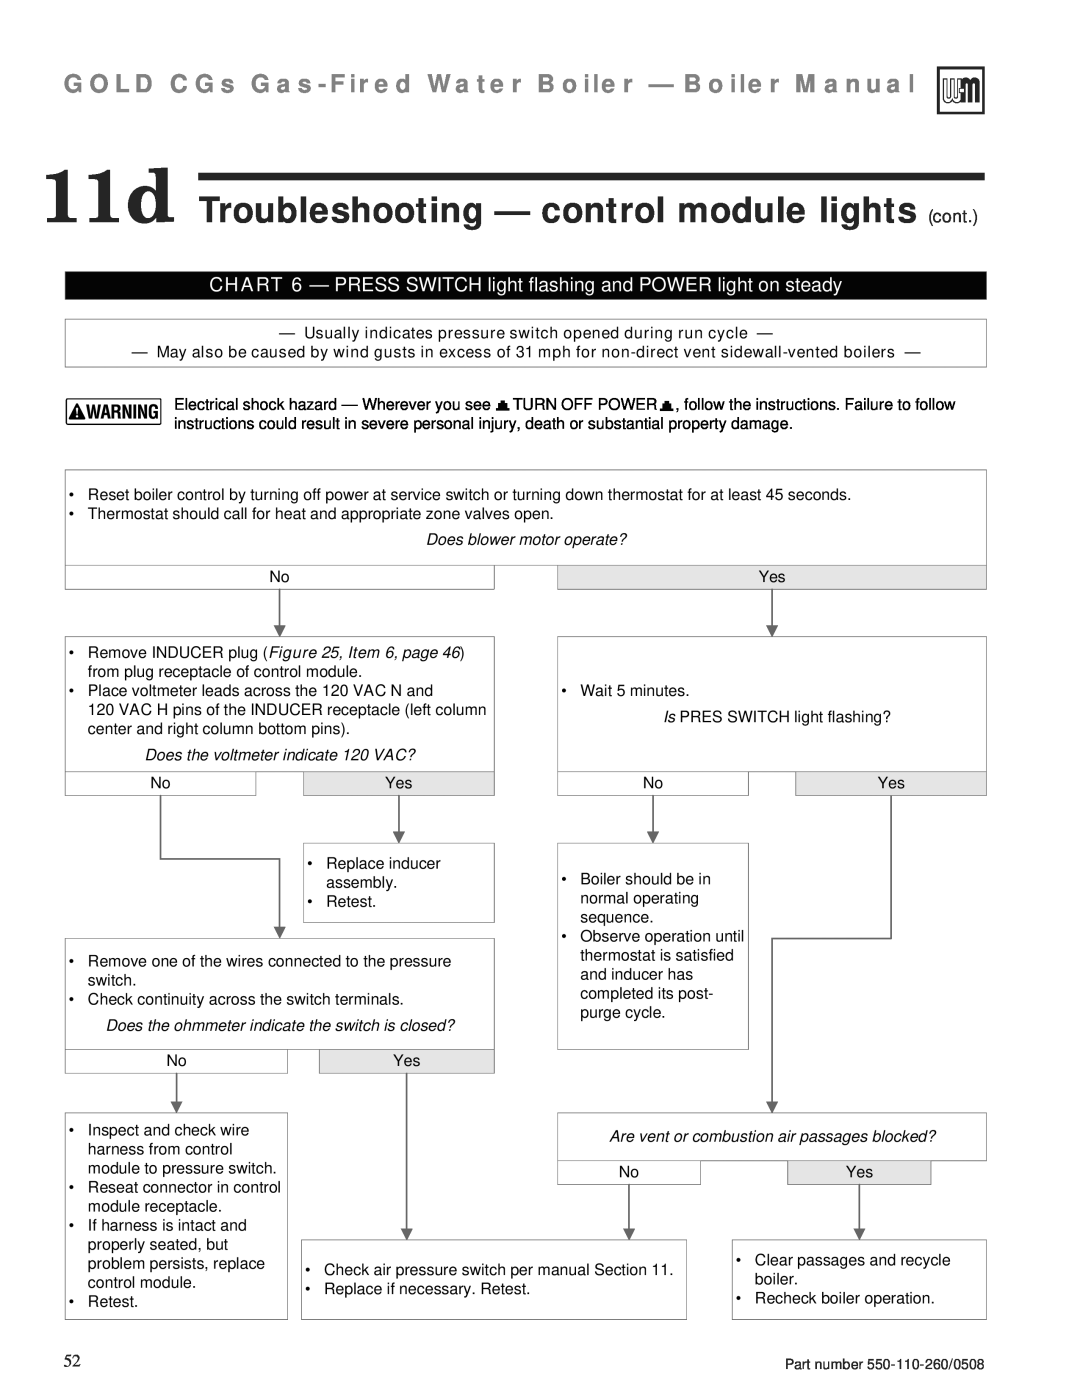 Weil-McLain 550-110-260/0508 manual 11d Troubleshooting — control module lights cont, Does blower motor operate? 